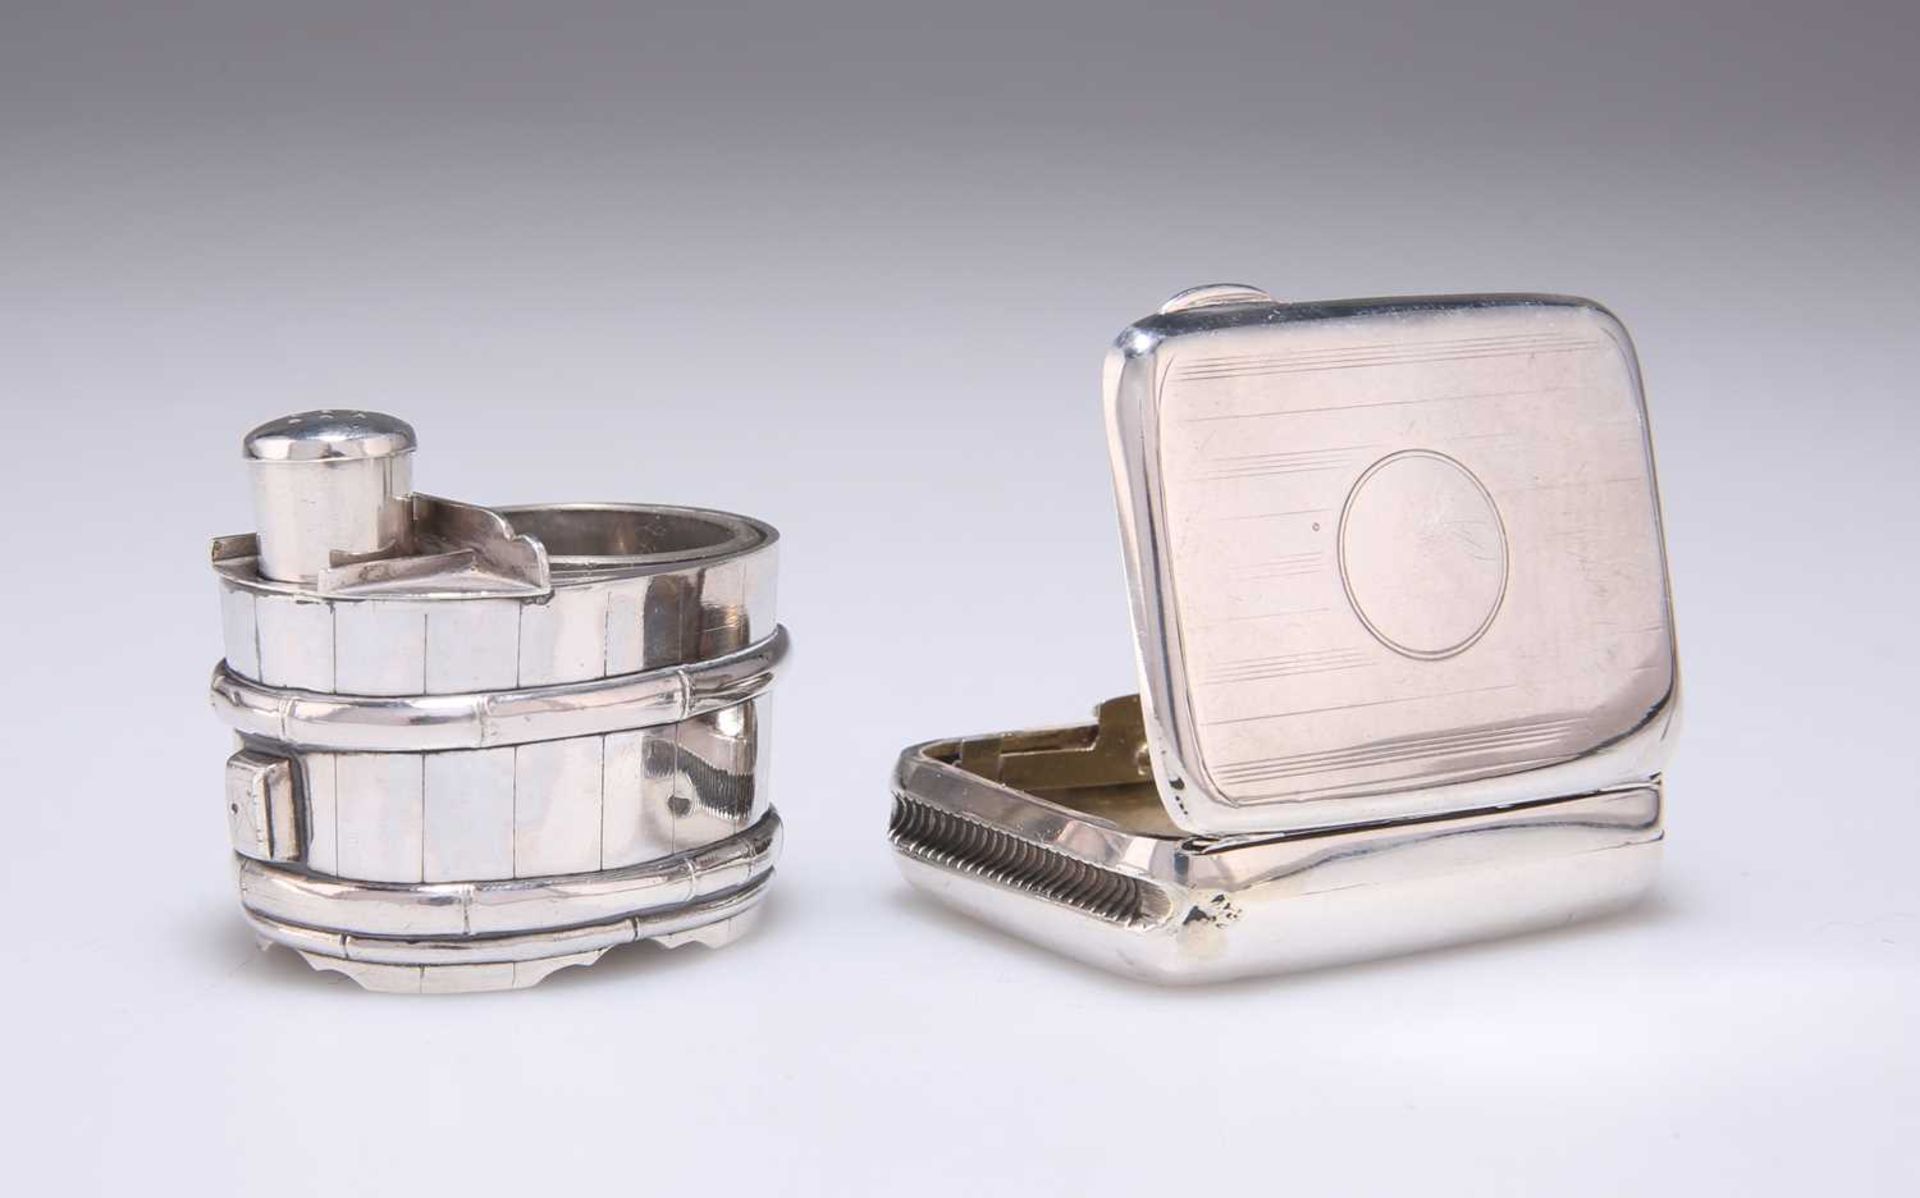 A STERLING SILVER BARREL-FORM NOVELTY INKWELL, 20TH CENTURY